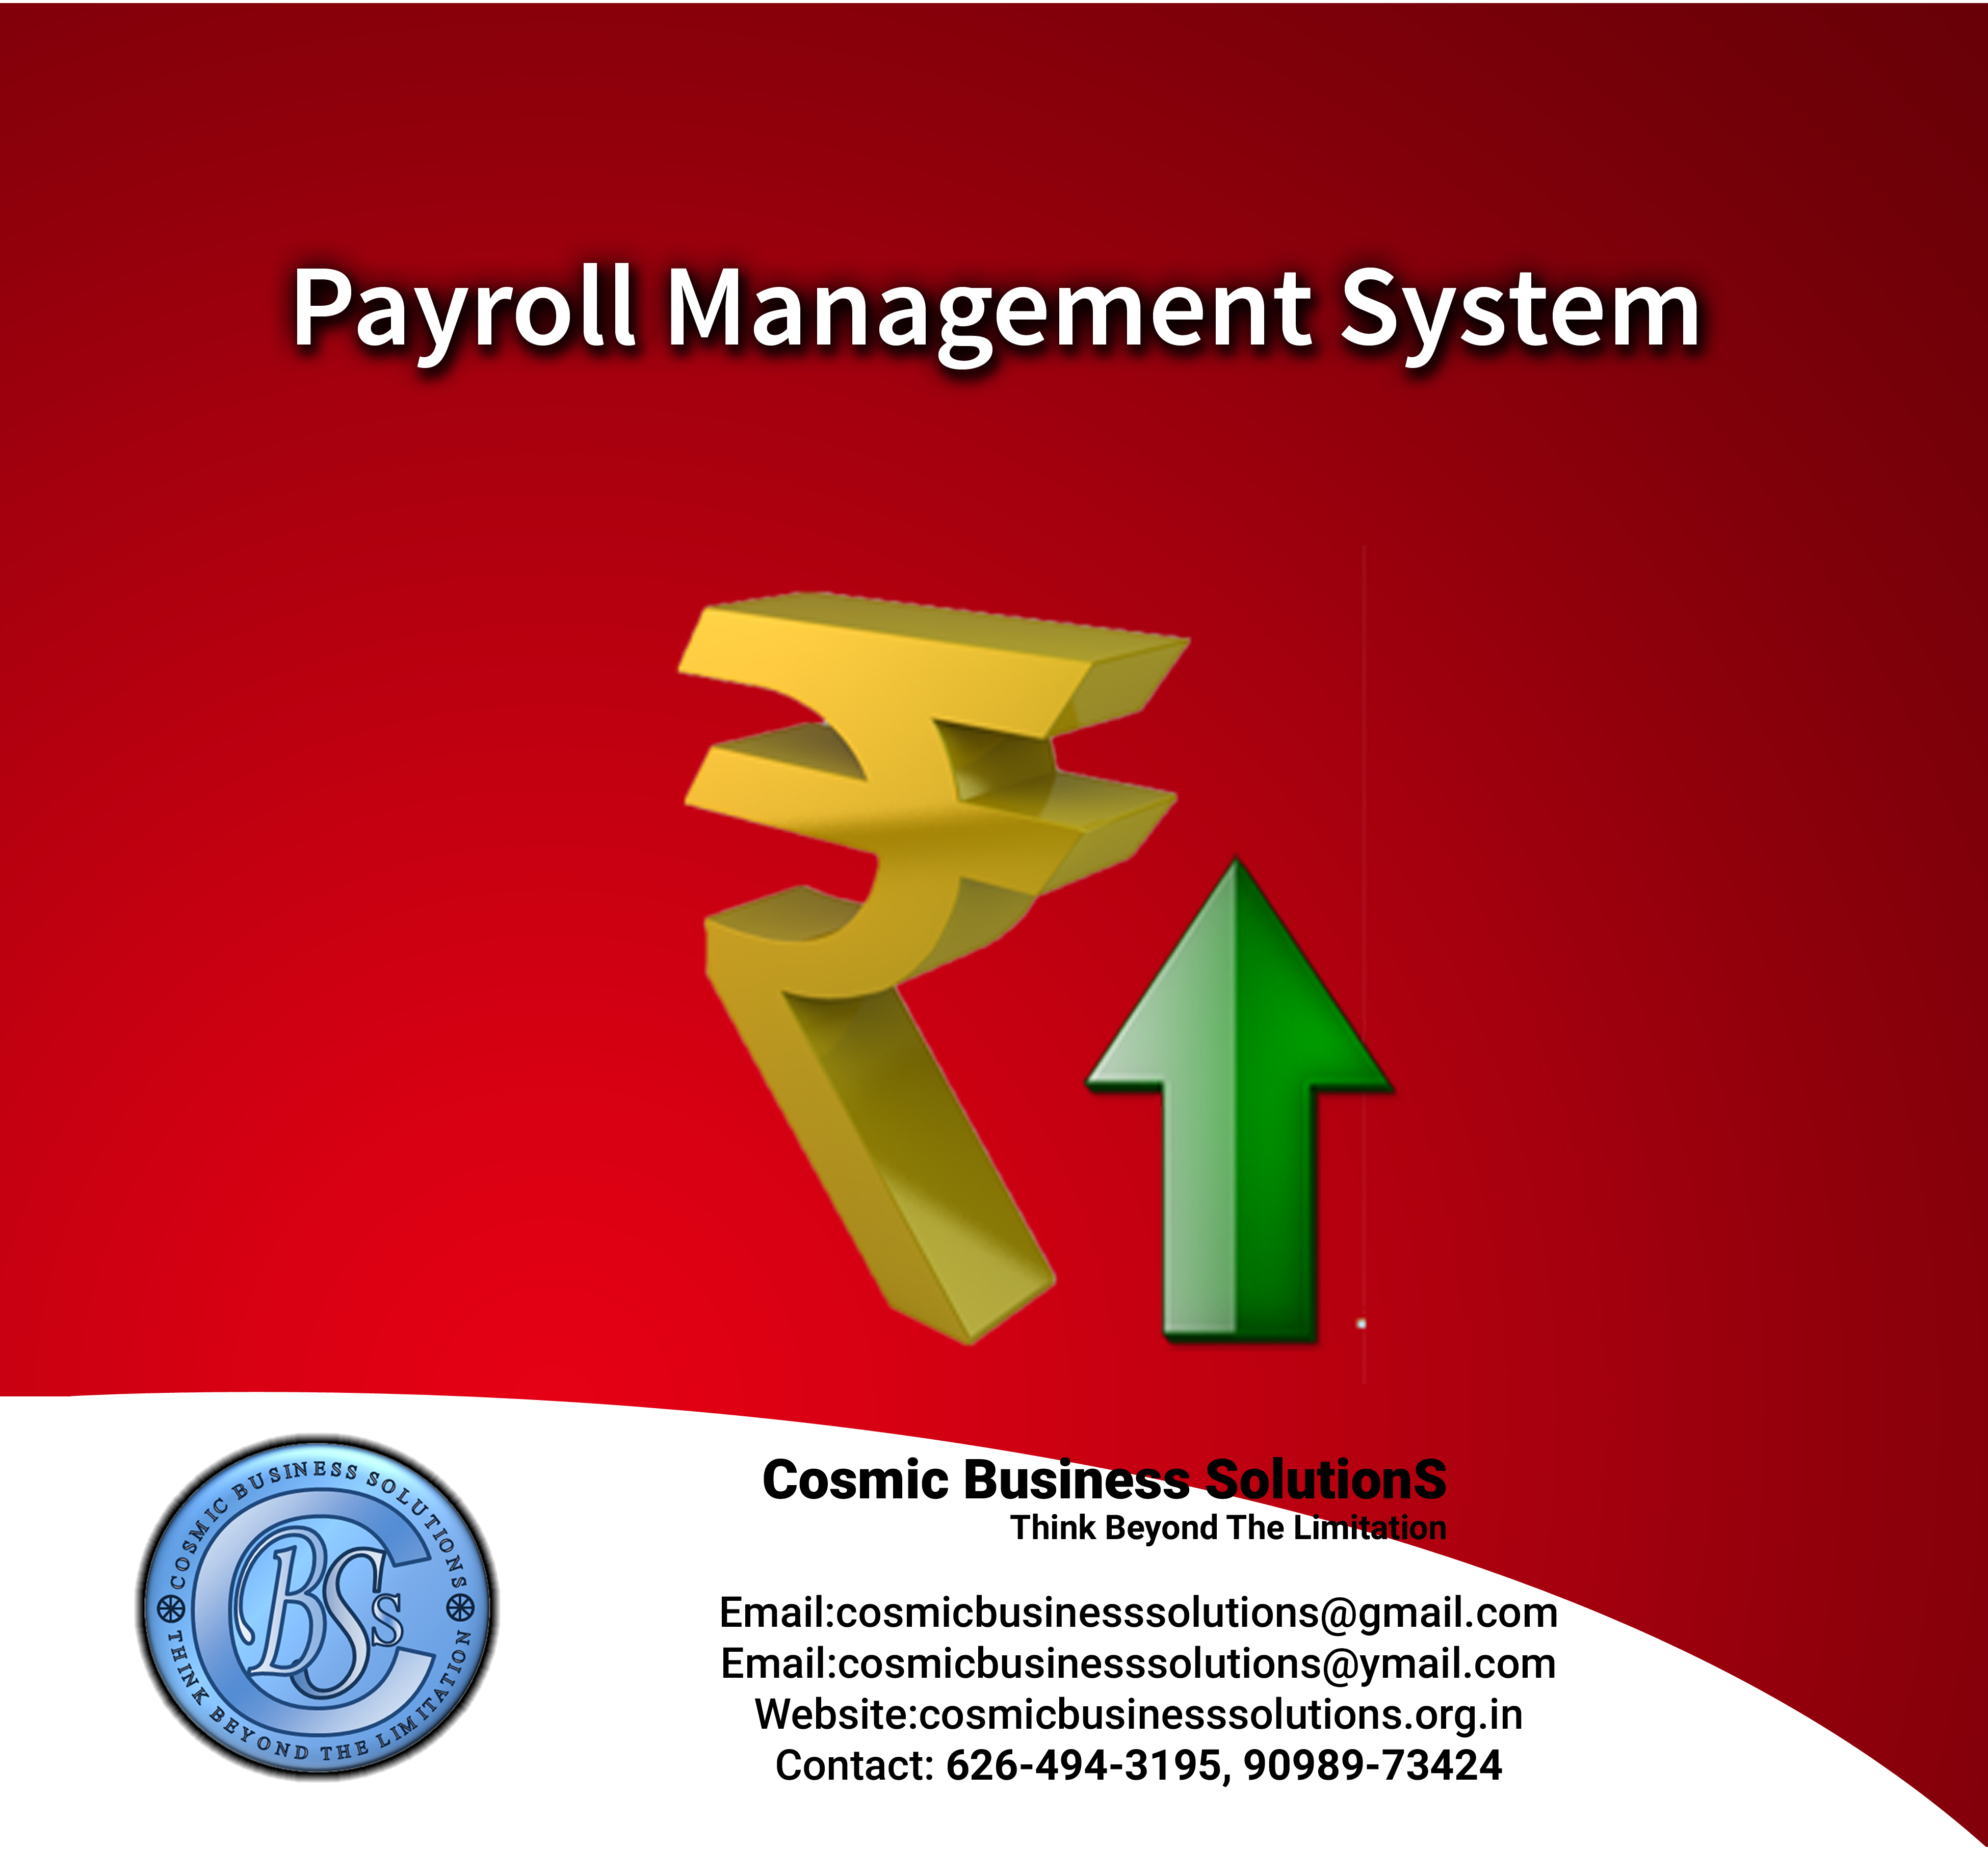 PAYROLL MANAGEMENT SYSTEM (SILVER EDITION) from COSMIC BUSINESS SOLUTIONS